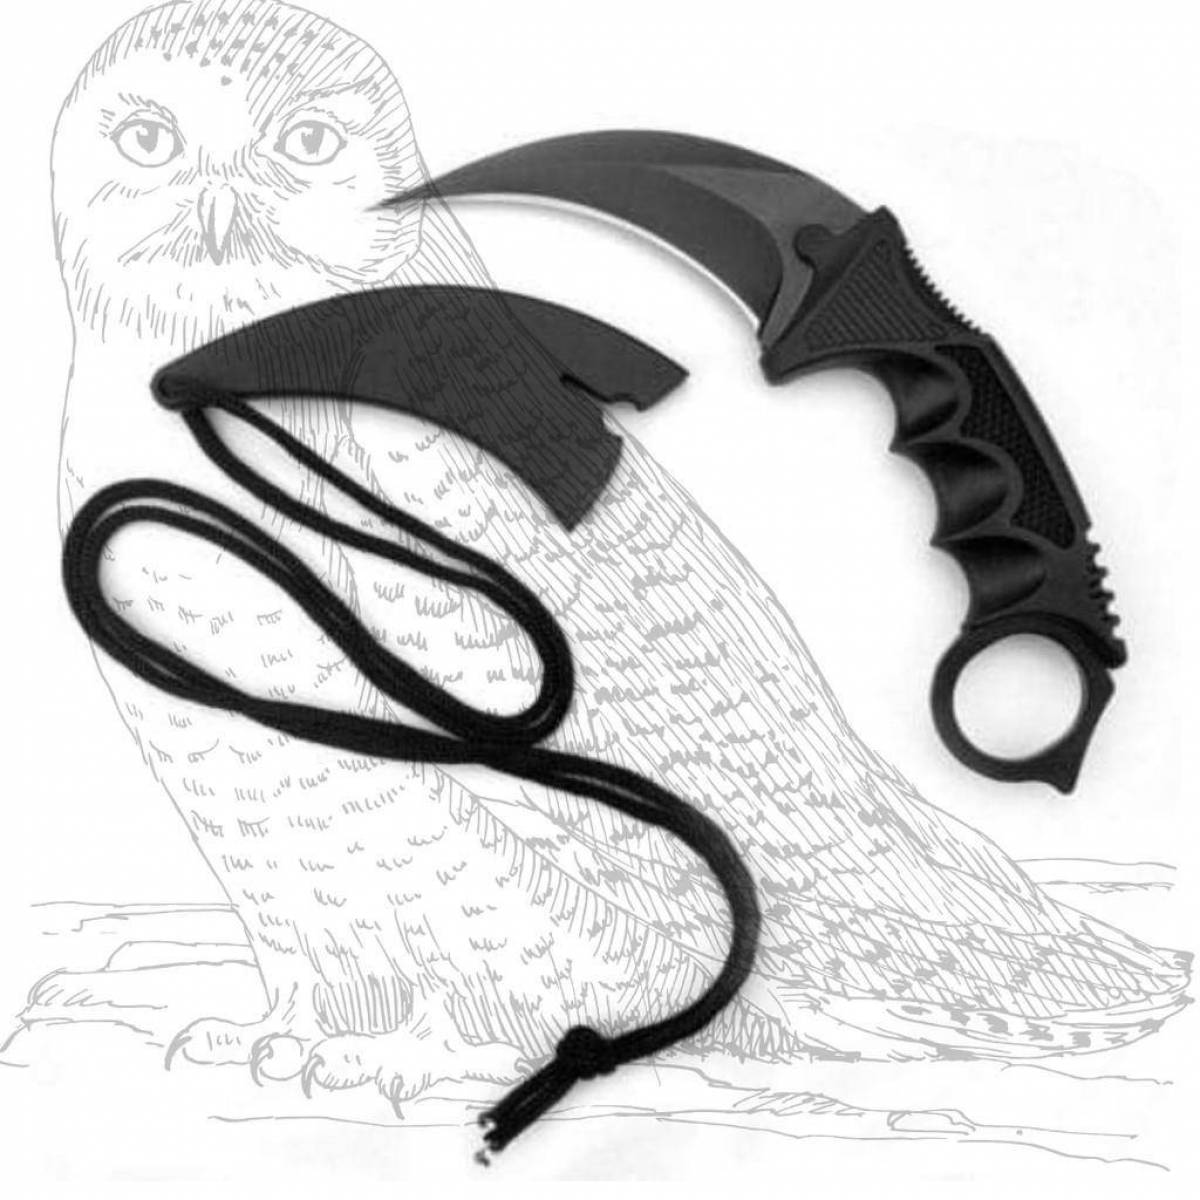 Coloring of the dazzling karambit knife from standoff 2